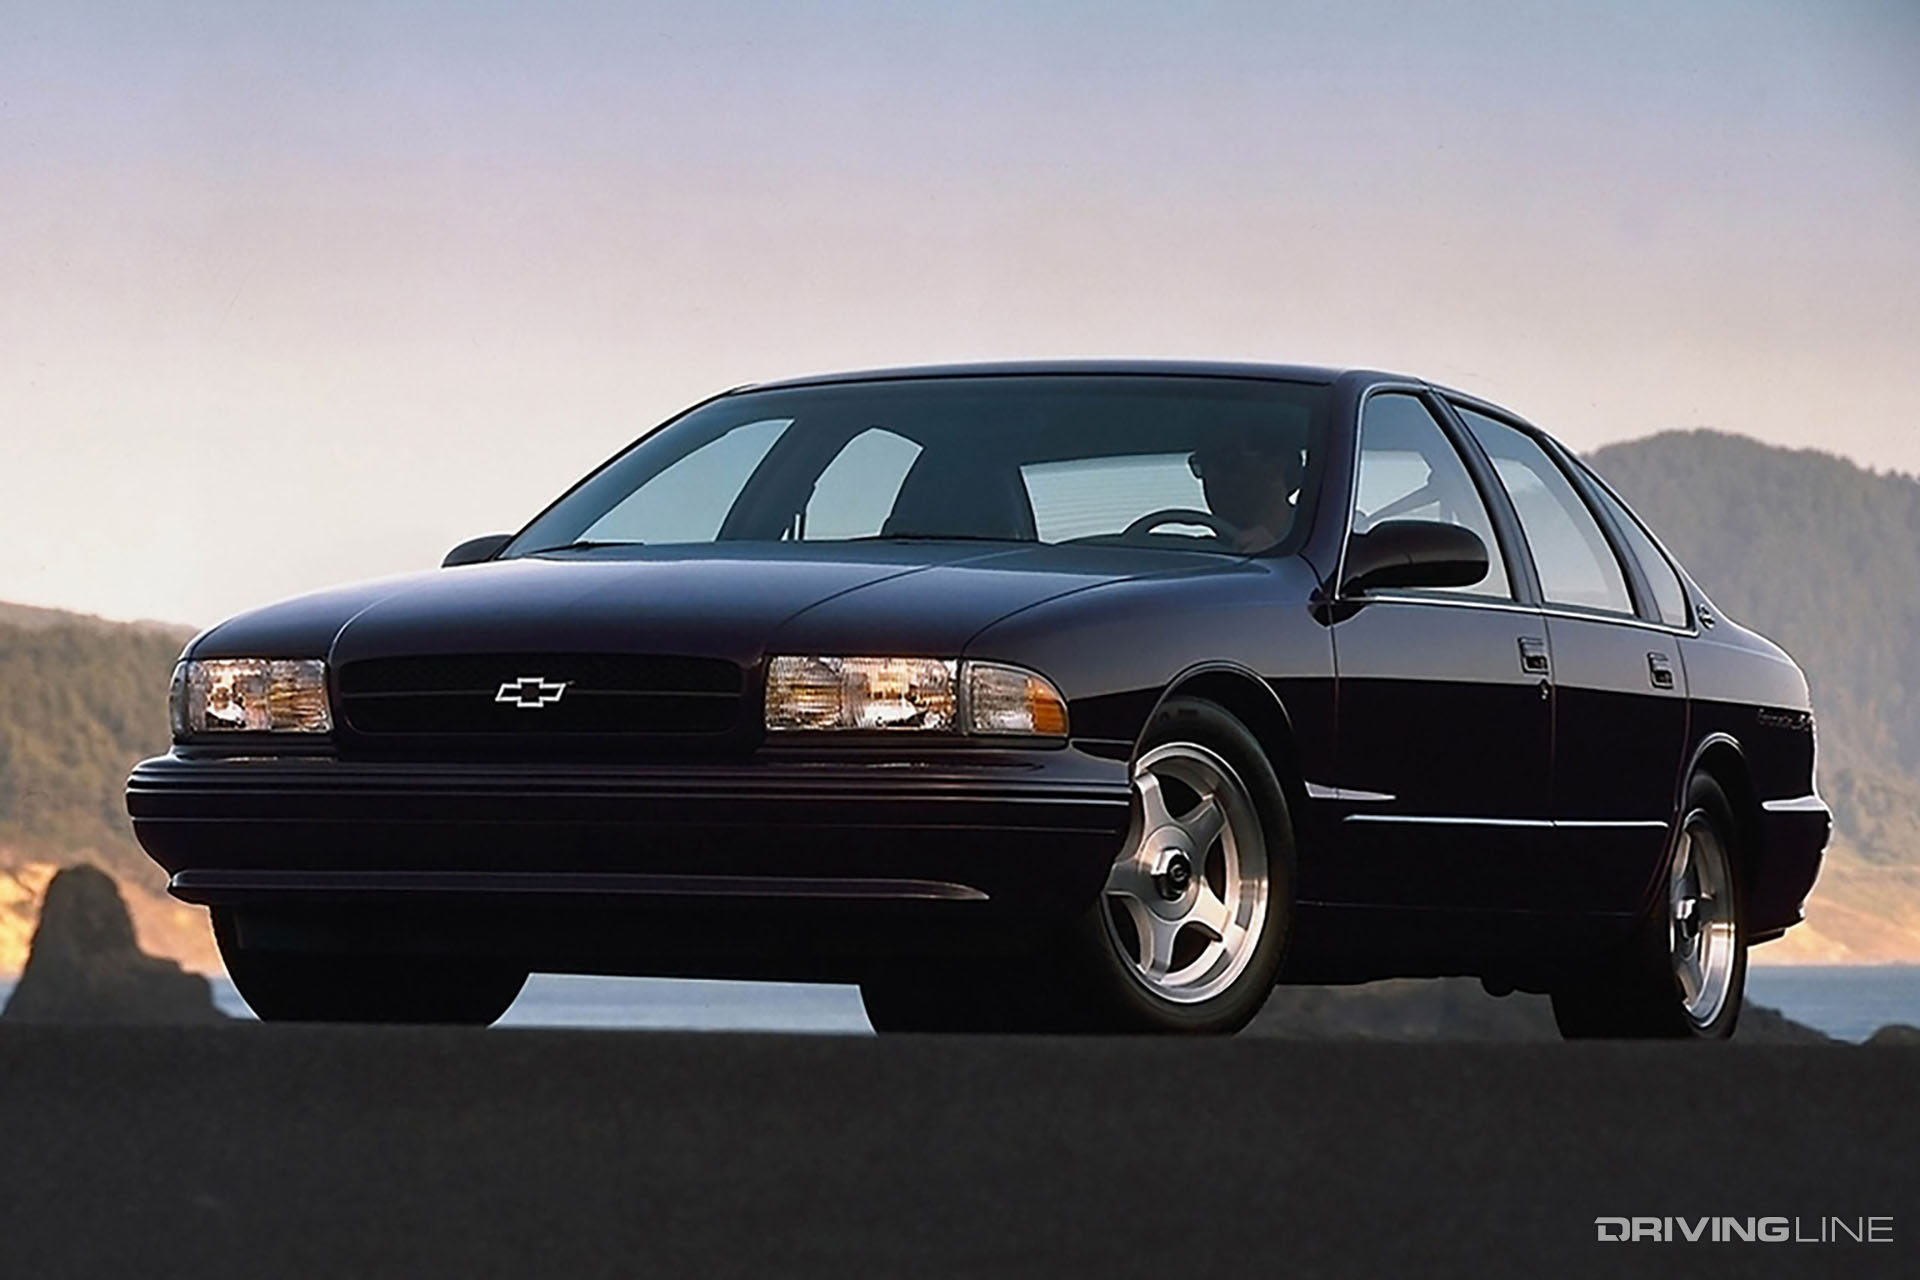 Back in Black: How the '94-'96 Chevy Impala SS Became One of America's